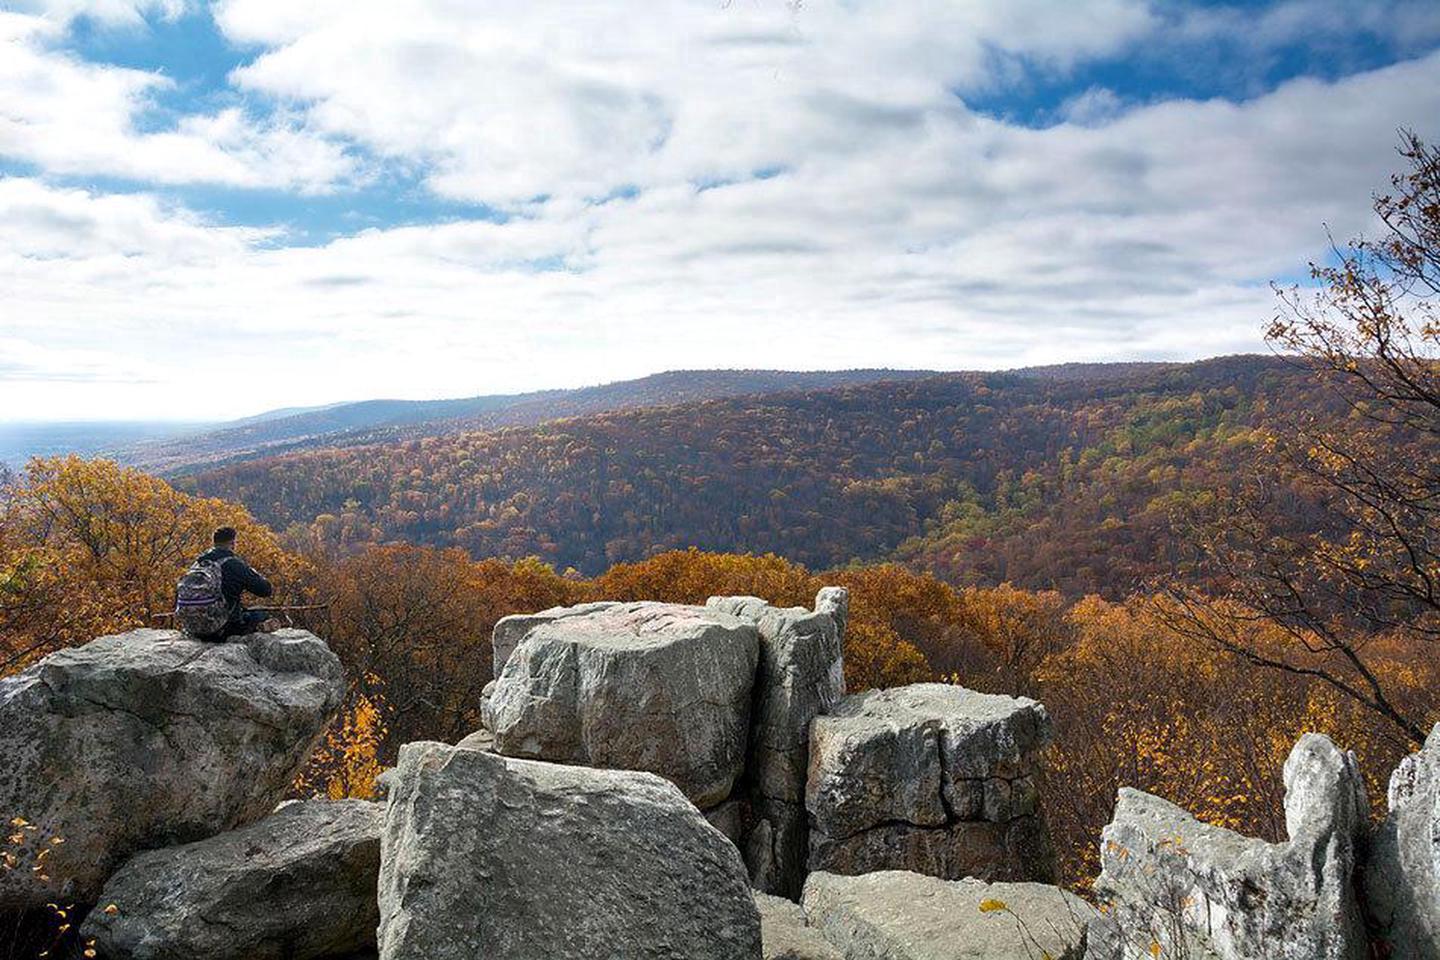 A person sits on a rock overlooking mountains covered in fall forest.